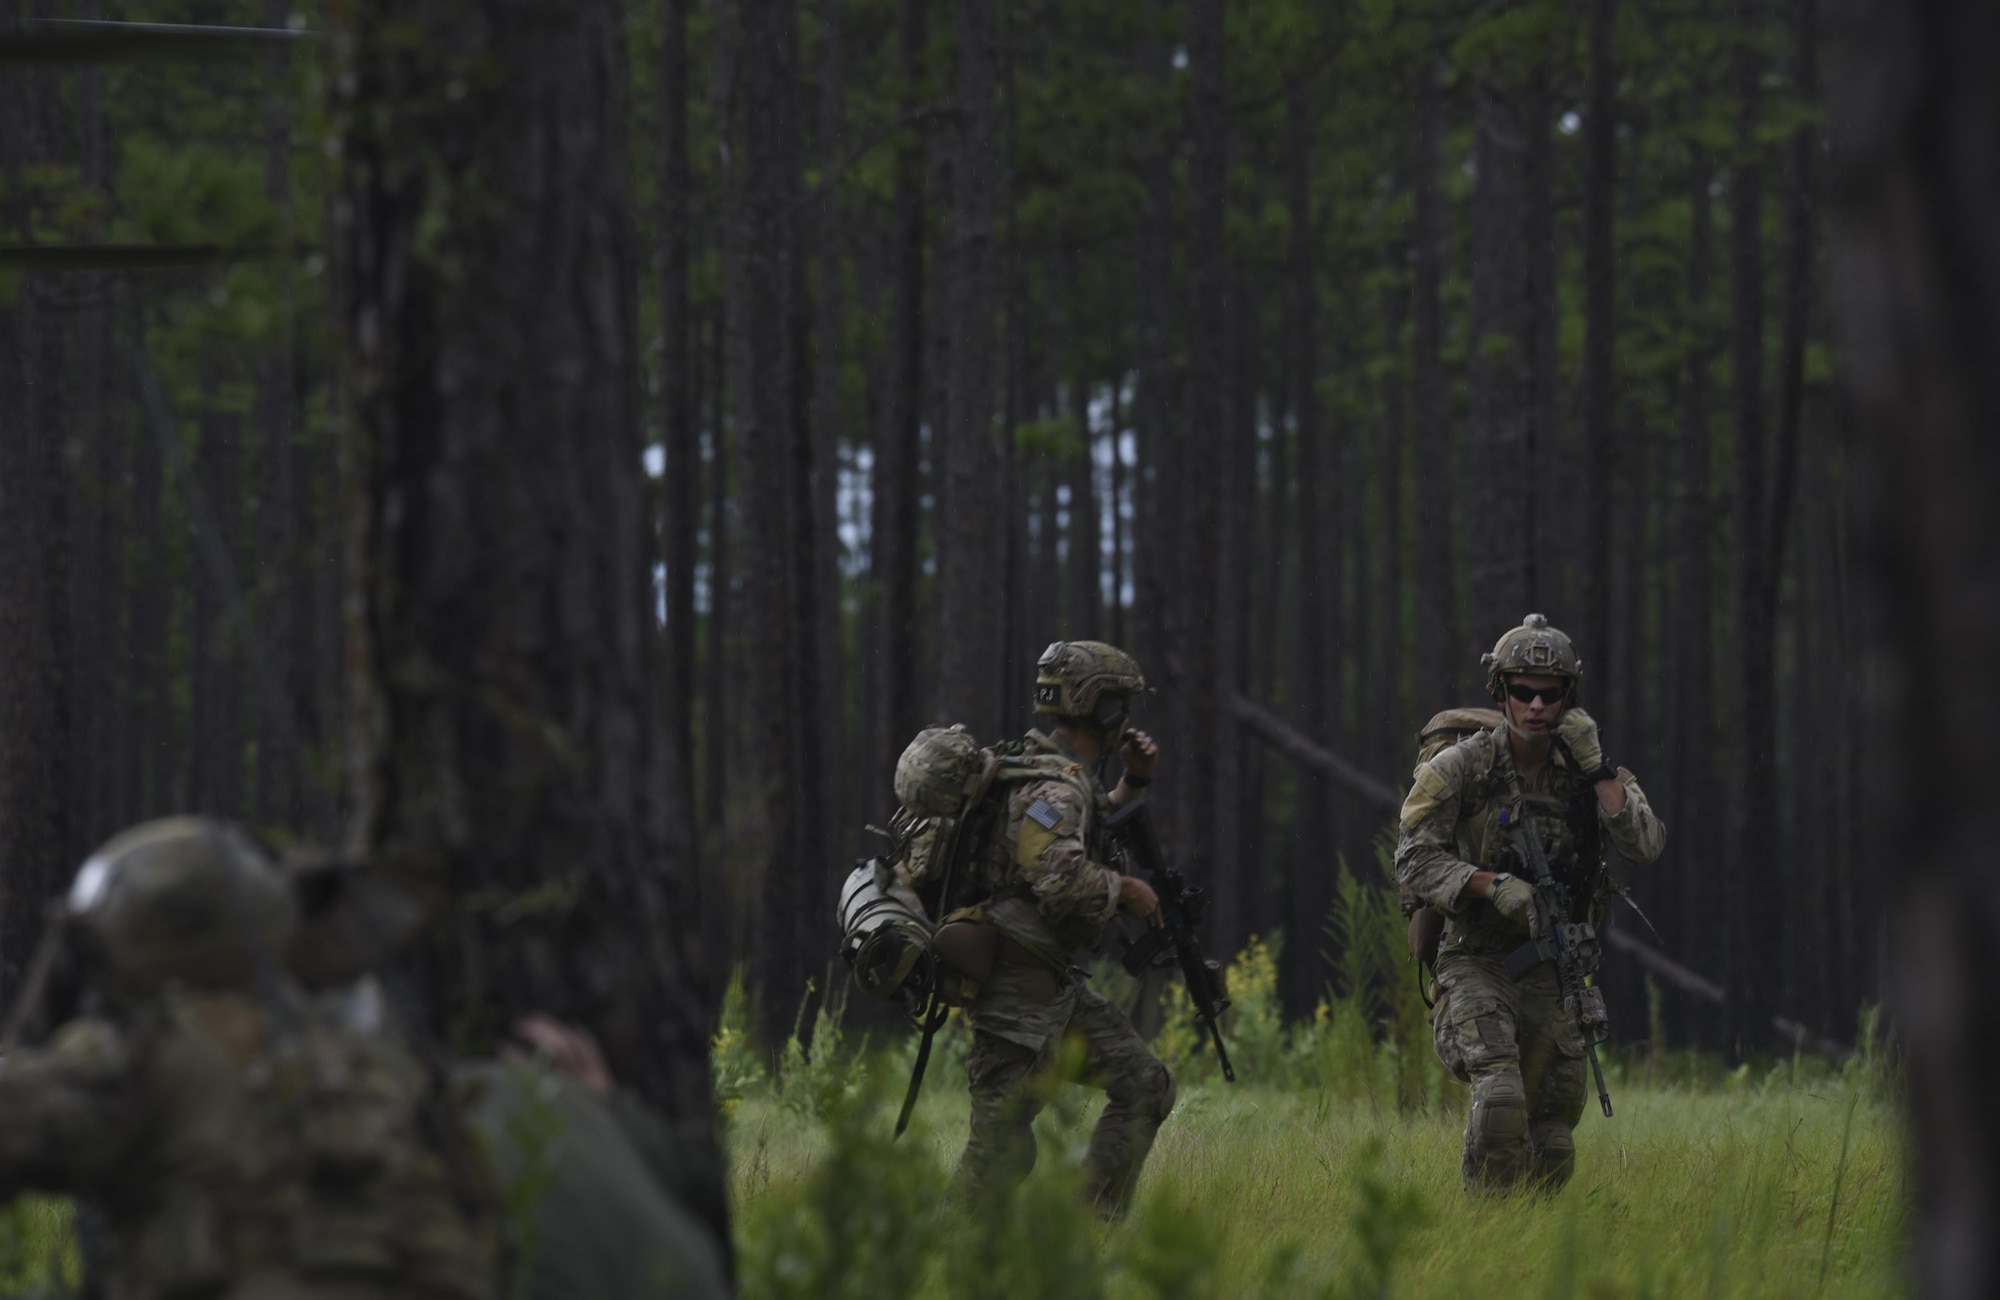 U.S. Air Force pararescuemen from Moody Air Force Base, Ga., disembark from an HH-60G Pave Hawk and begin sweeping a wooded area near Tyndall Air Force Base, Fla., for simulated hostiles during a pilot recovery mission while taking part in Stealth Guardian Aug. 8, 2017.